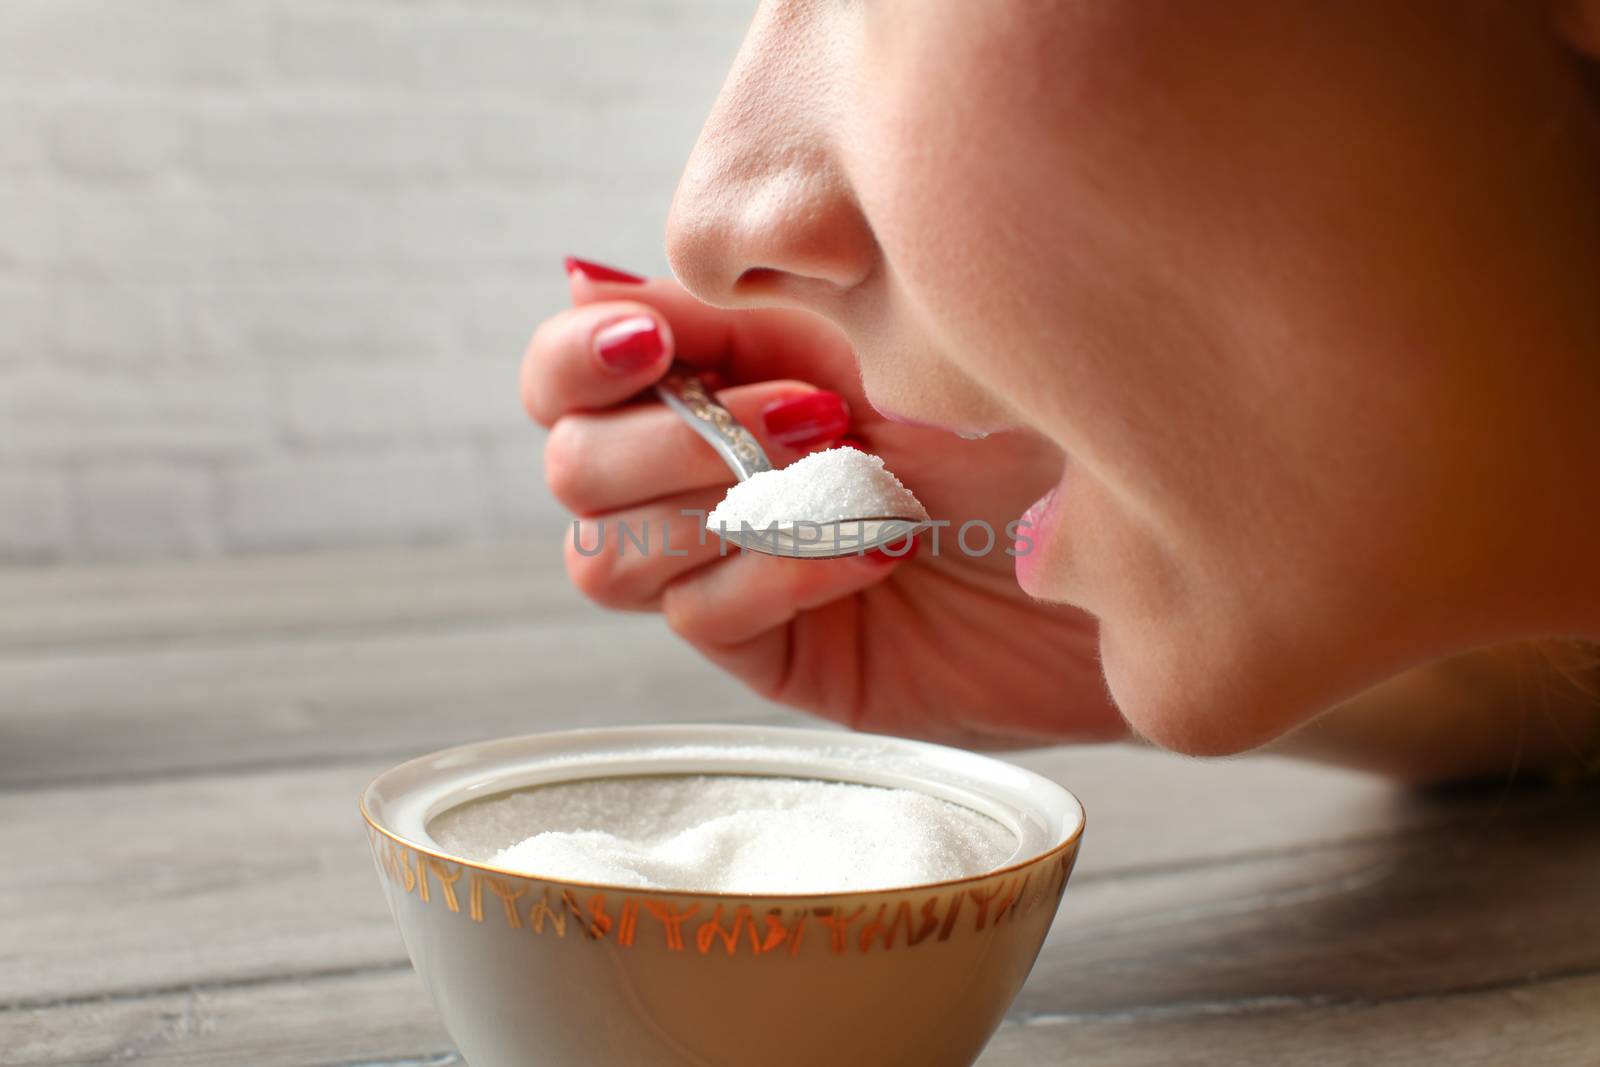 Detail on mouth of woman about to eat spoon full of sugar from small sugar bowl. Overuse of fructose concept.